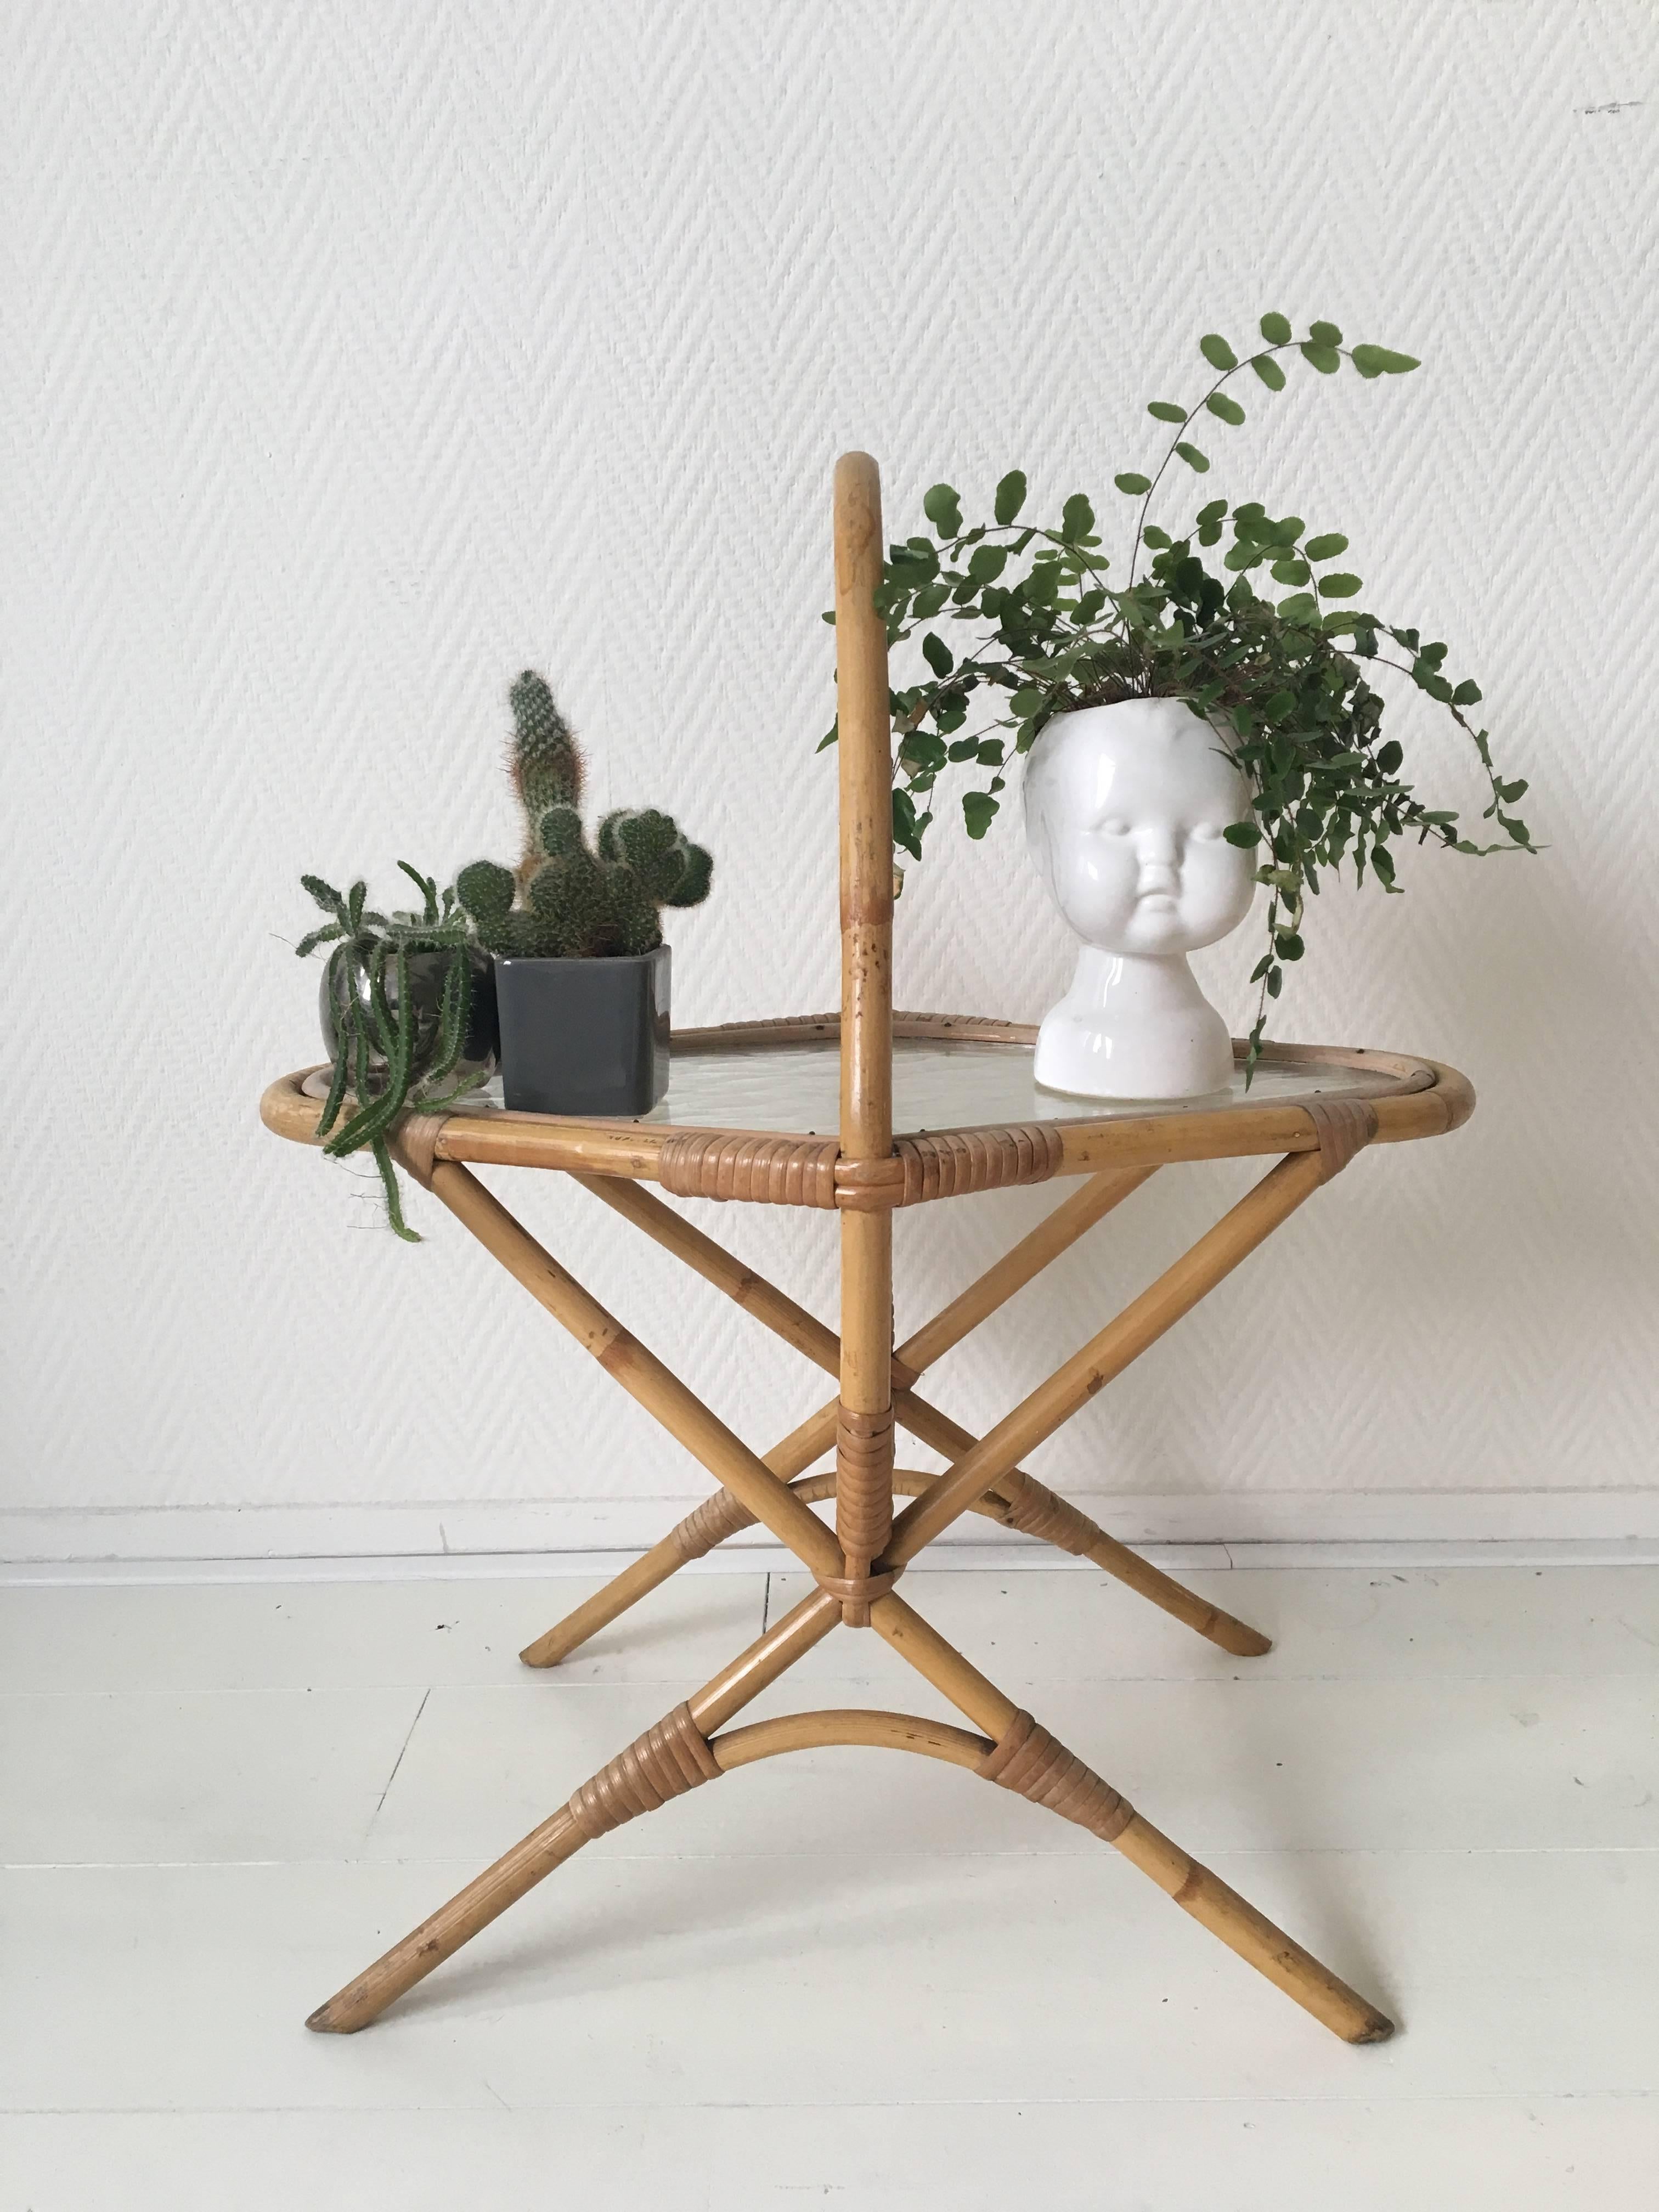 20th Century Small Vintage Rattan and Glass Side Table, Planter, 1960s